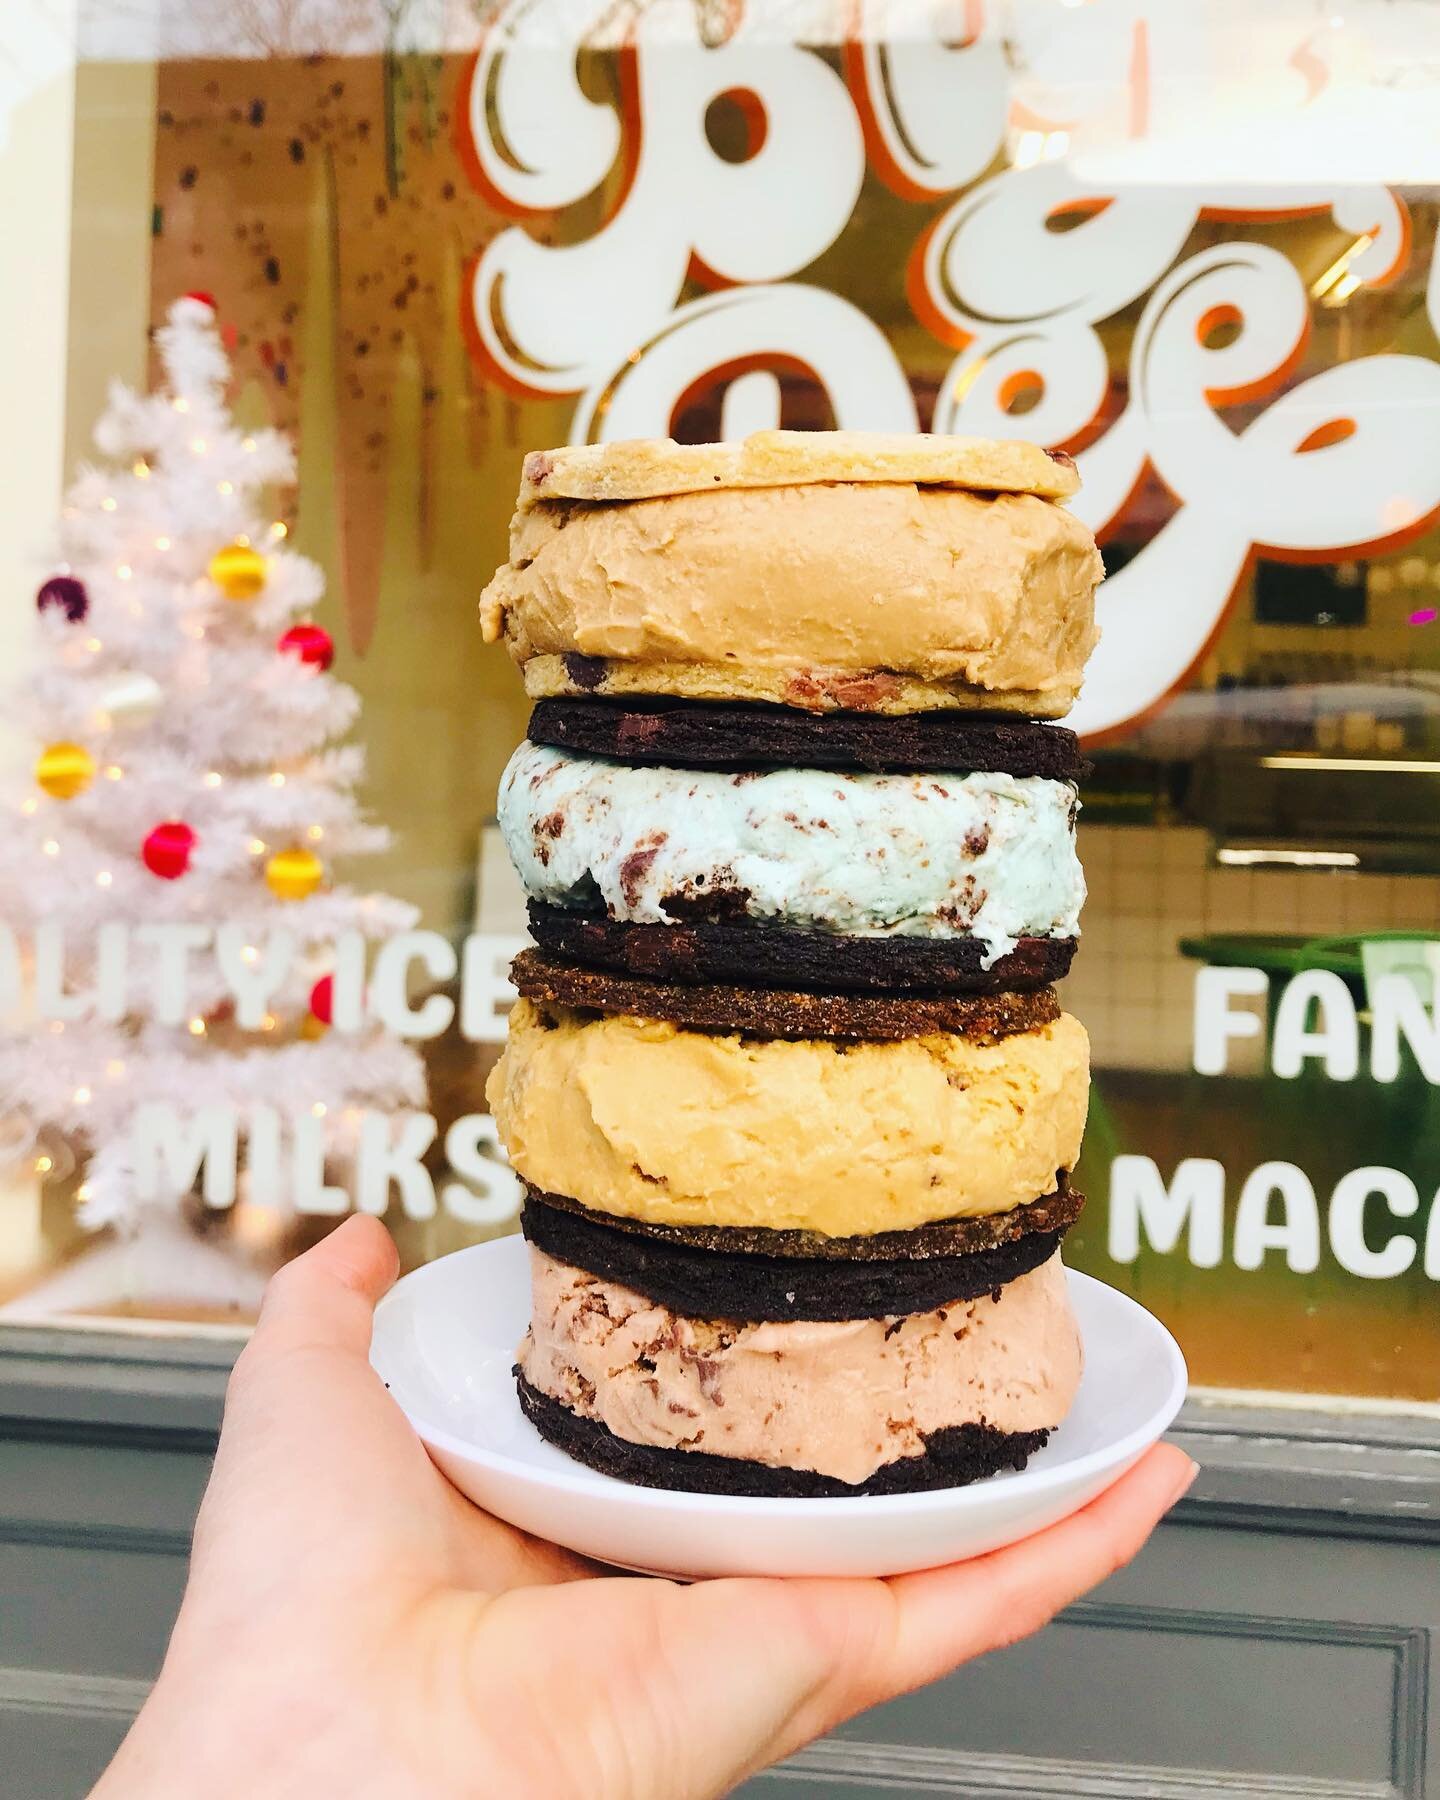 🎄Ice Cream Sammie drop XXXmas Edition🎄🎅🏻 Featuring:

Coffee &amp; Bailey&rsquo;s Choco Chip
Vegan Mint Brownie
Gingerbread Cookie Dough
Nutella Brownie

Santa&rsquo;s favourite kinds! Get in here!